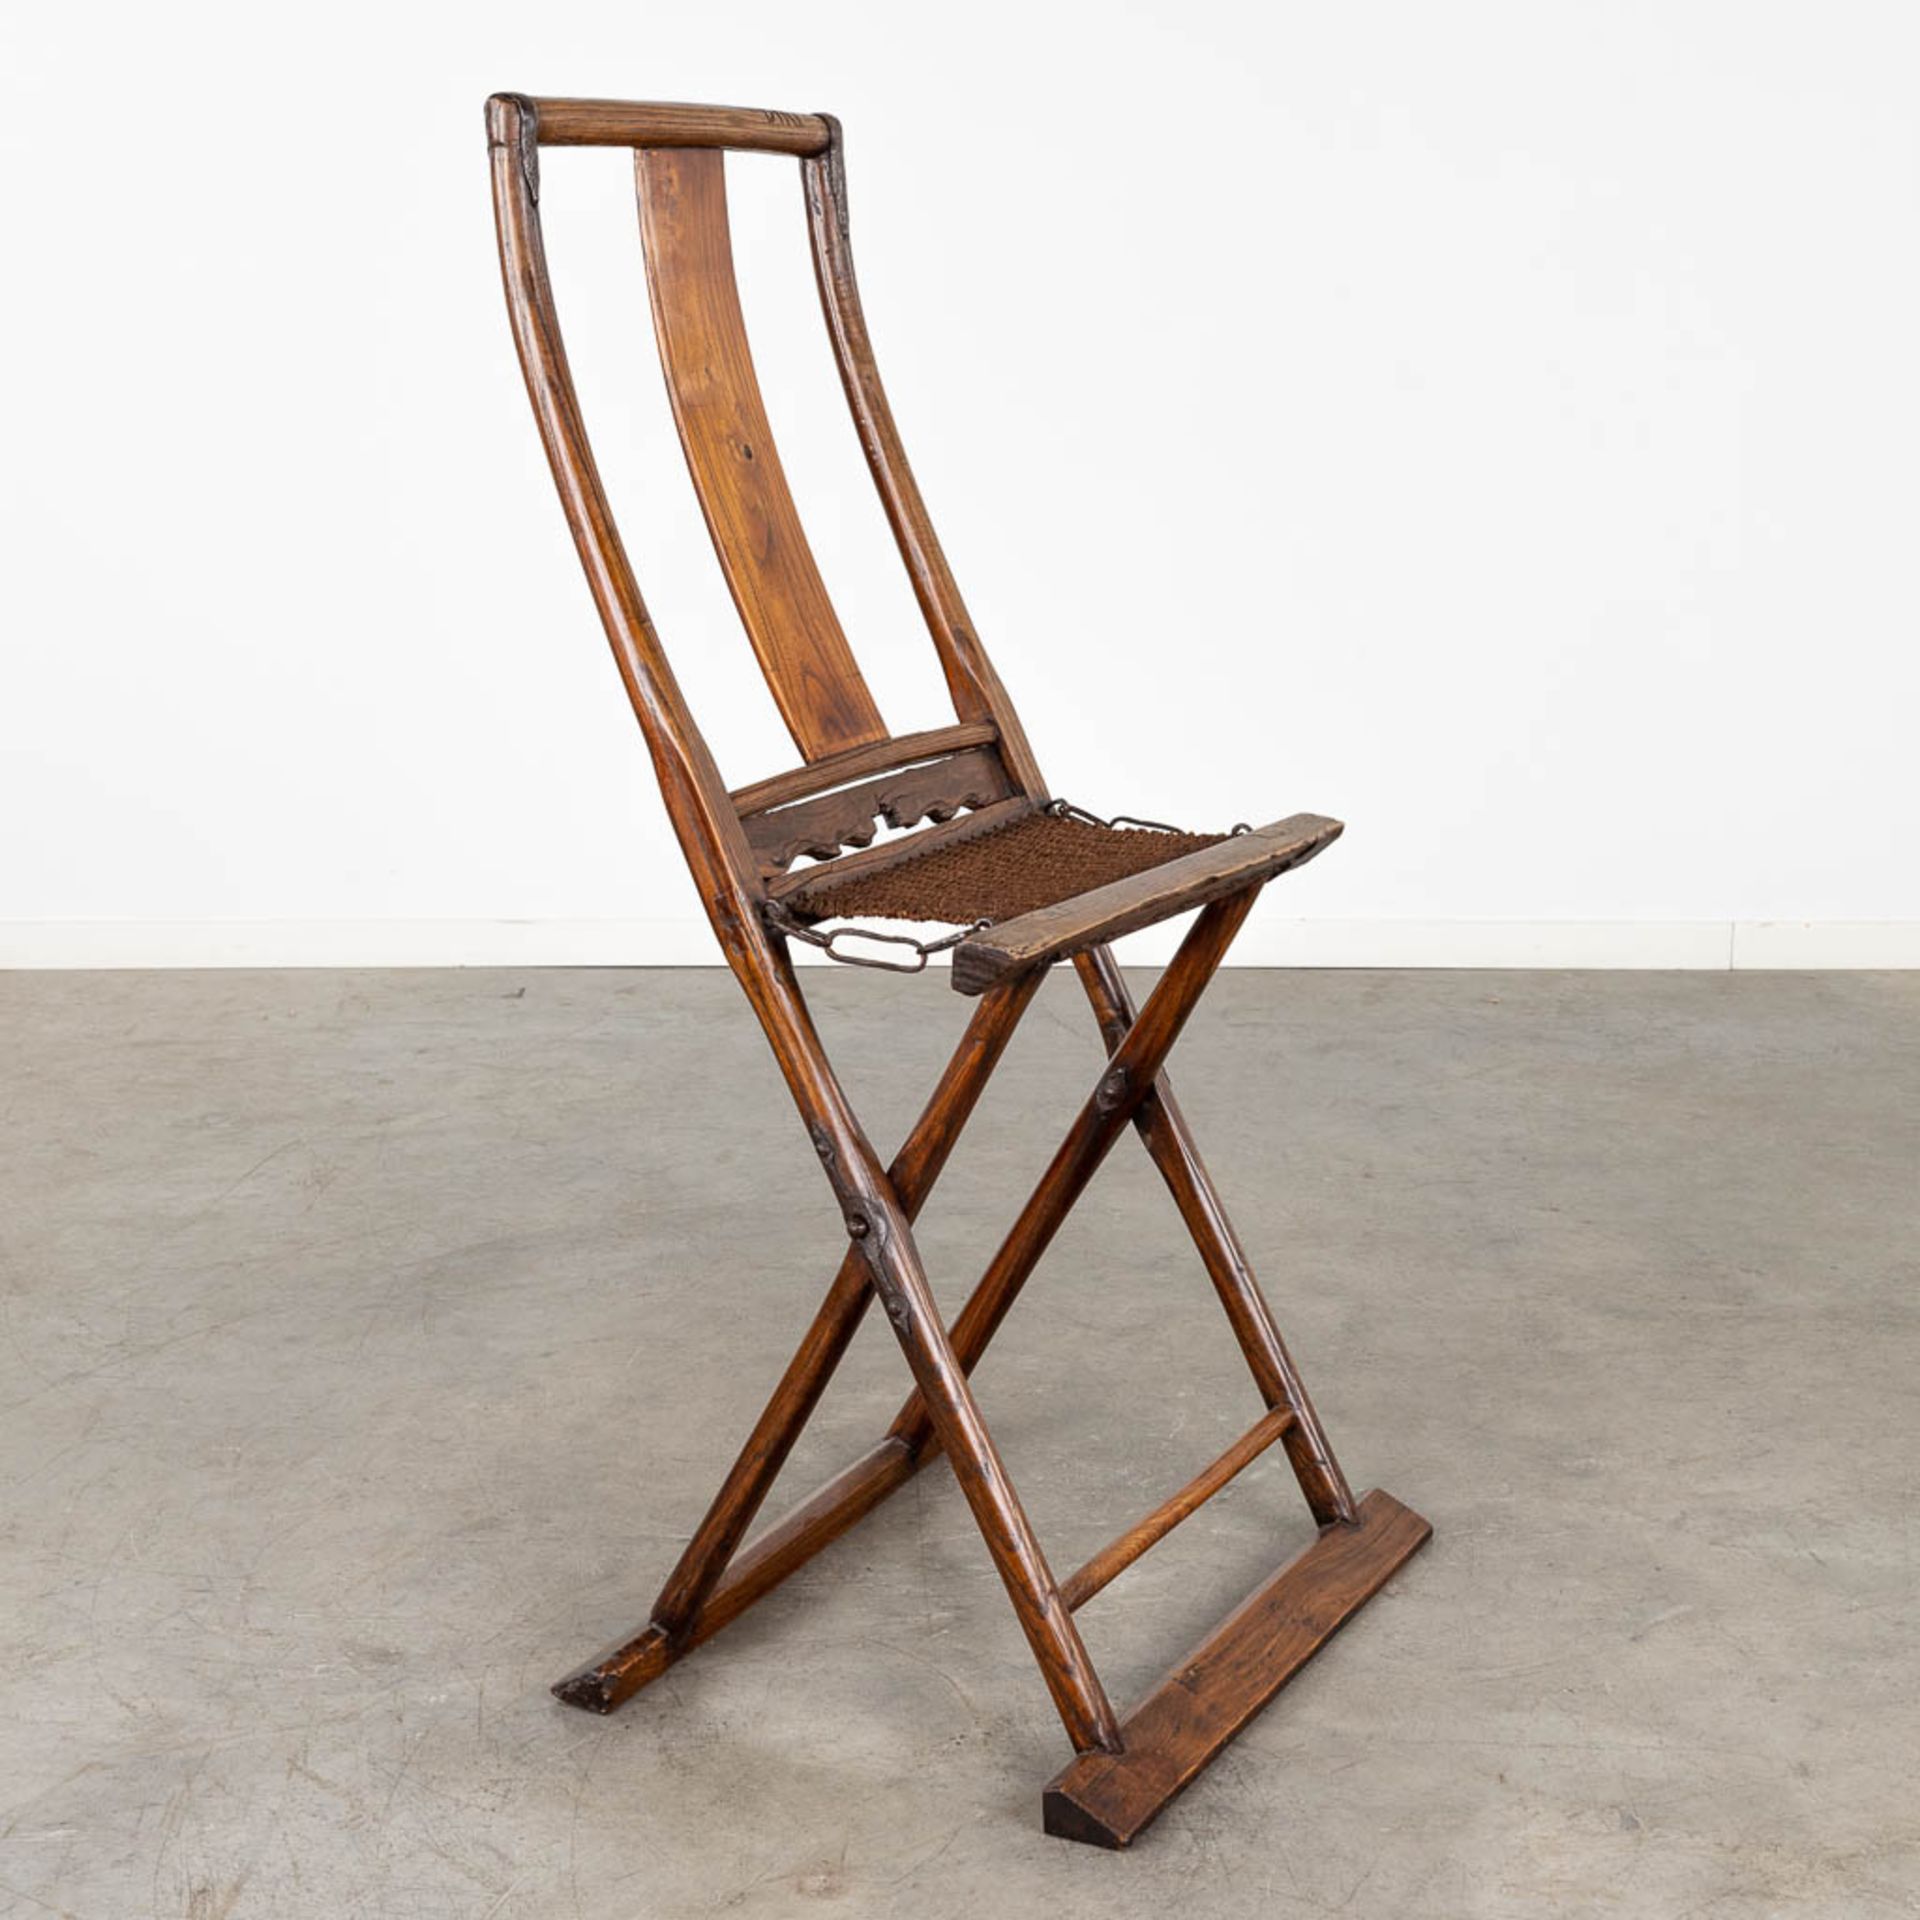 An antique Chinese travellers folding chair, probably 18th/19th C. (D:50 x W:60 x H:116 cm)